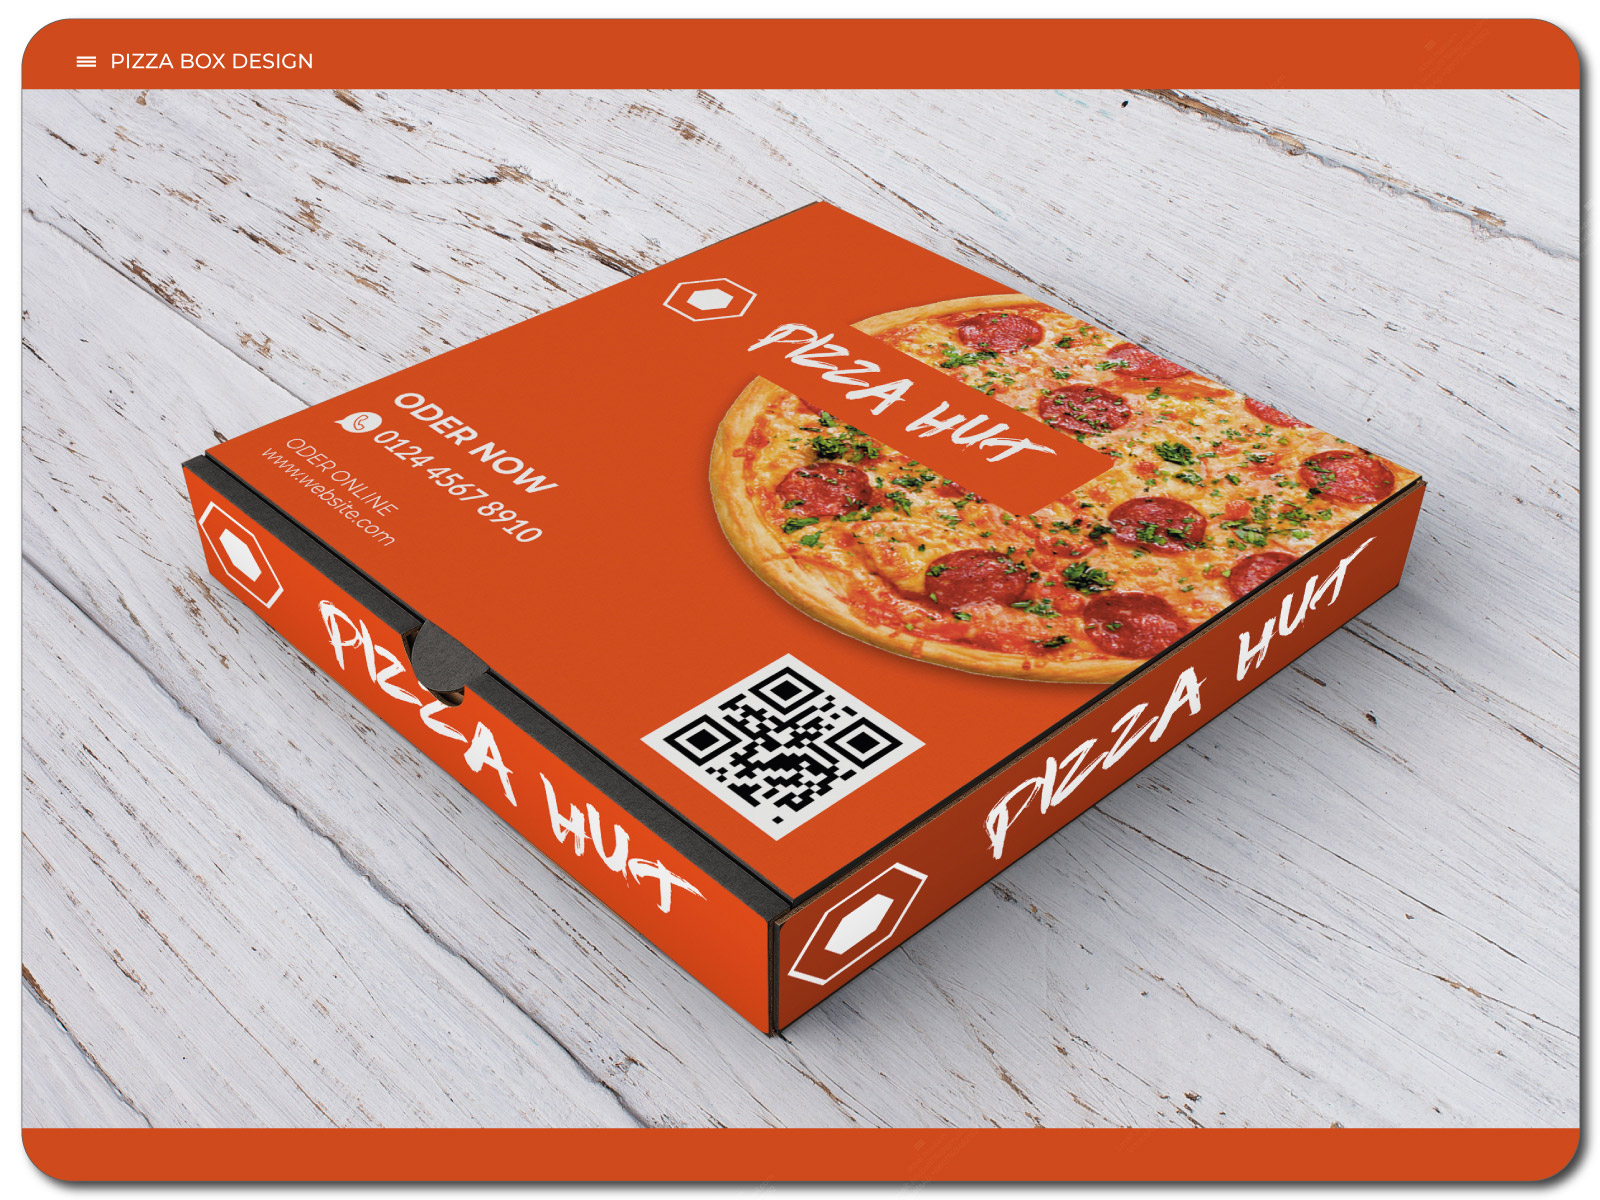 pizza box design template by Ikbal Hussain on Dribbble